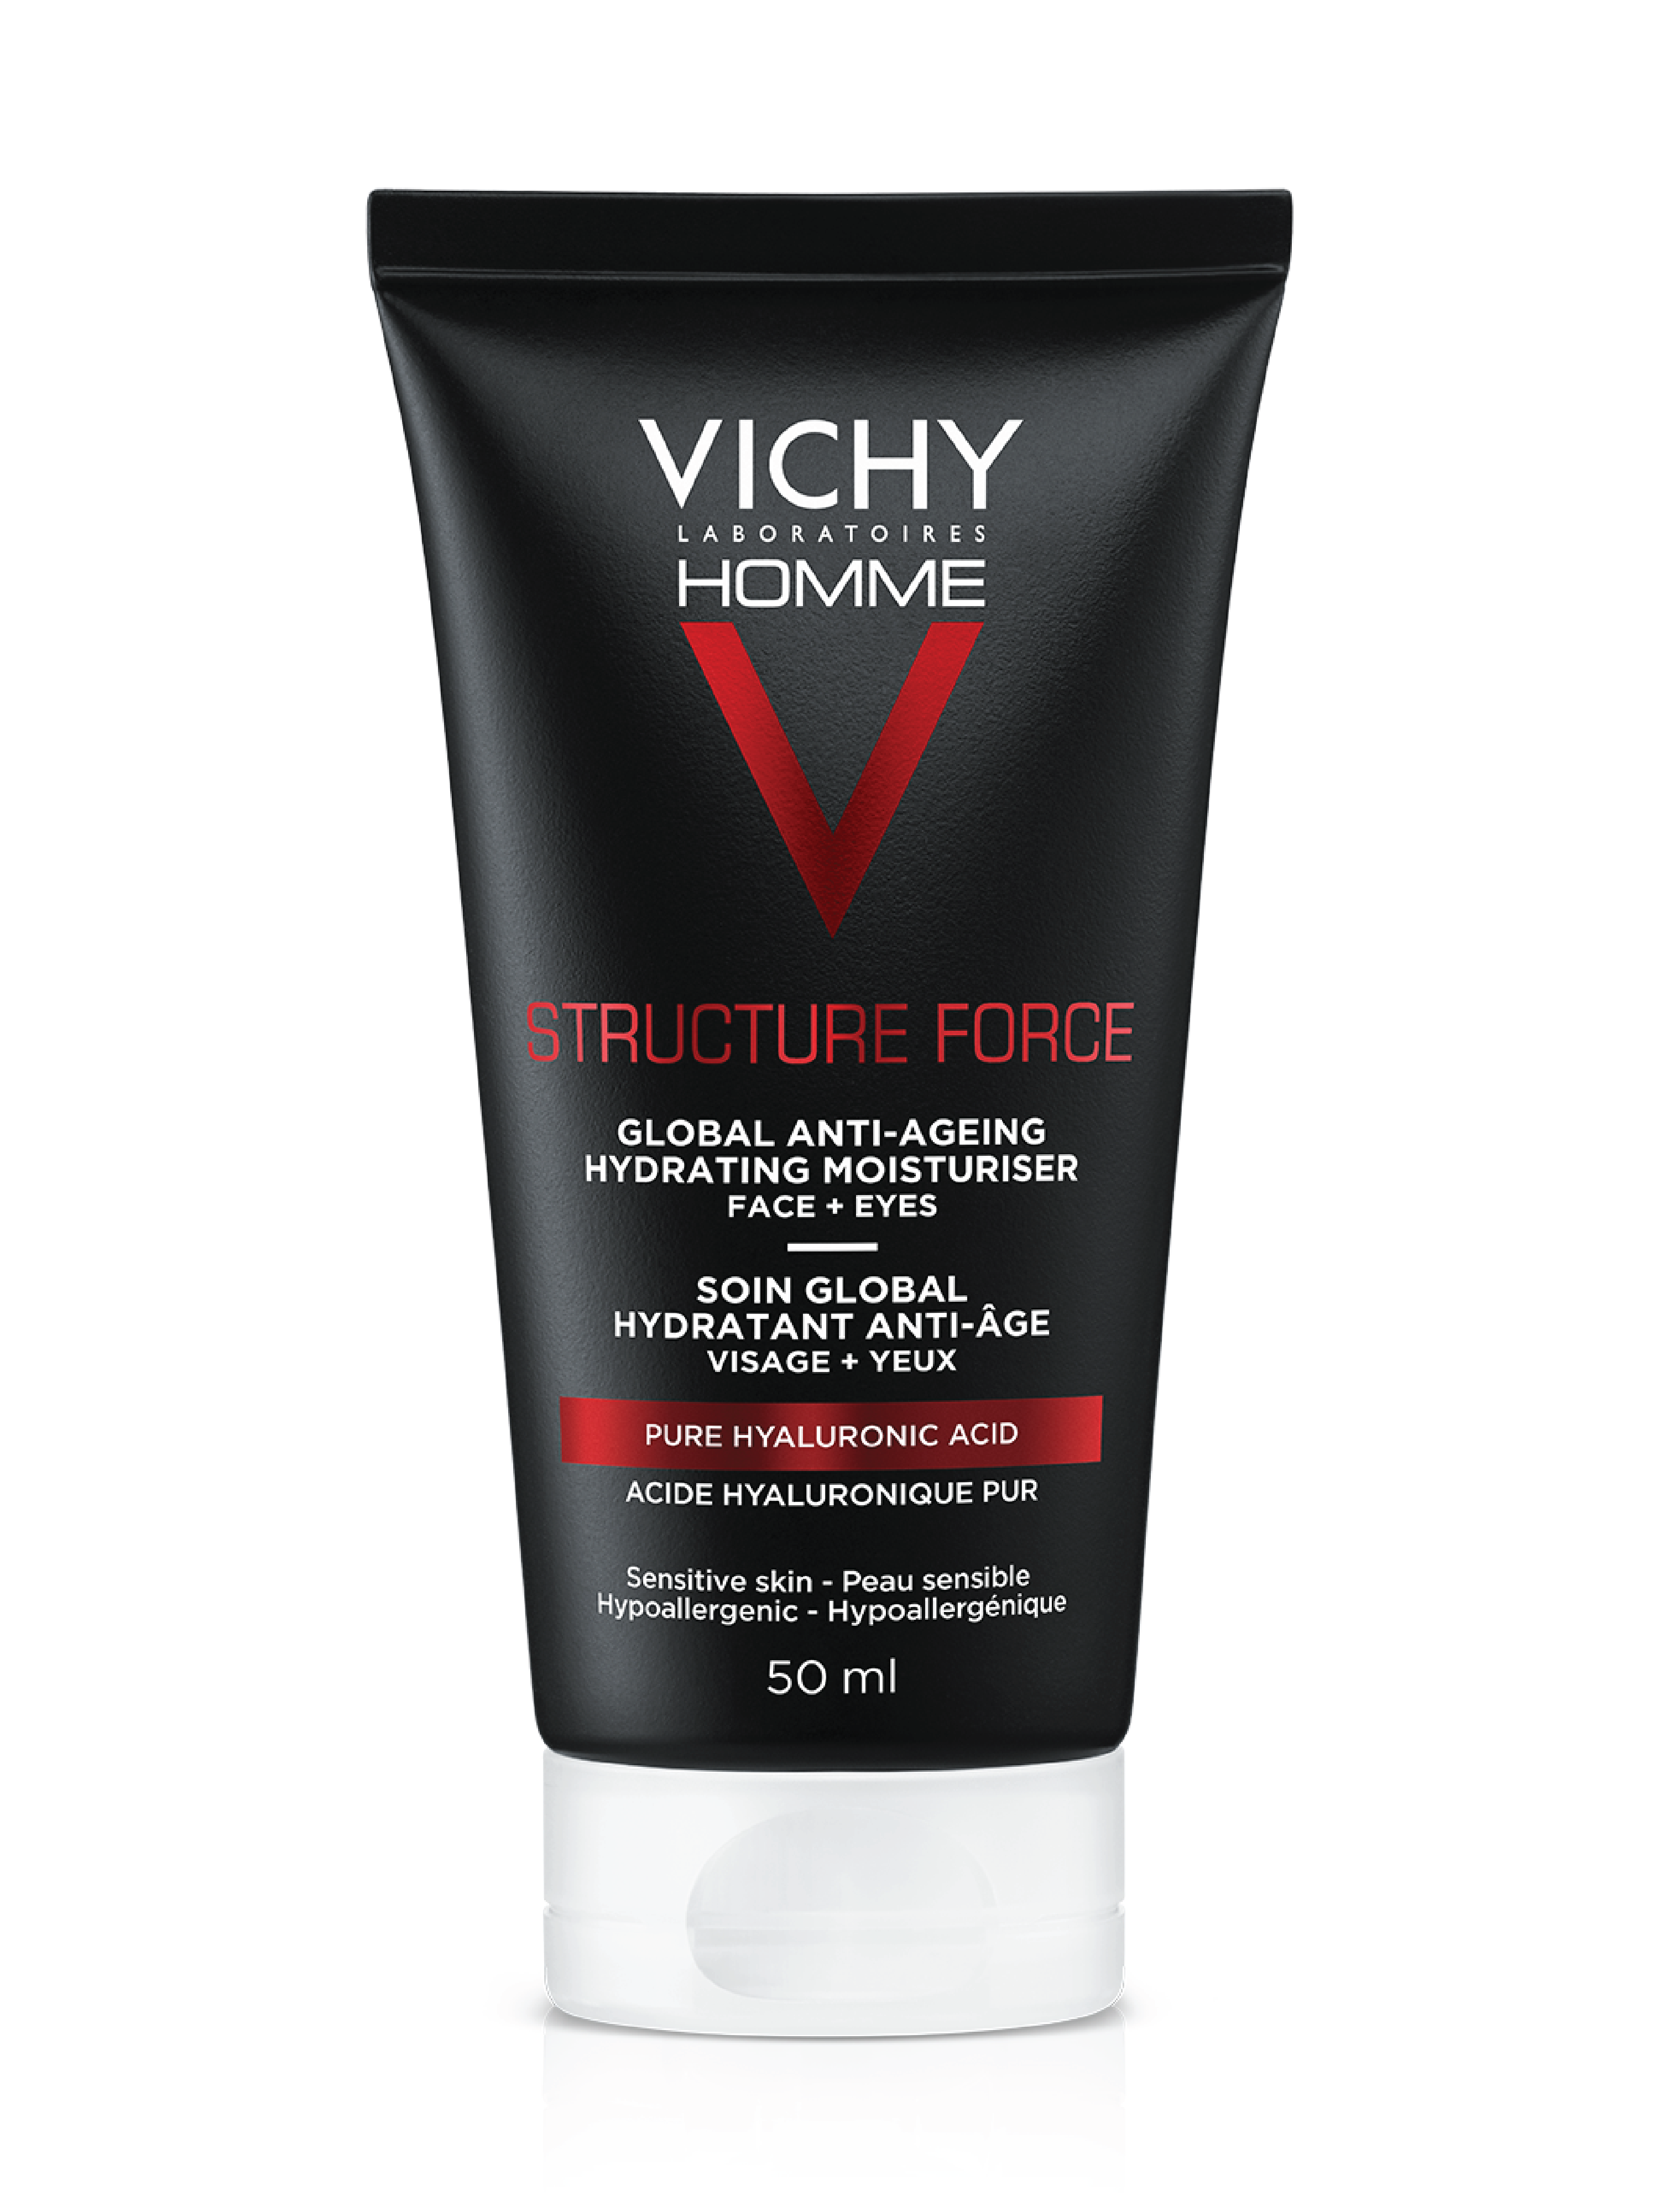 Vichy Homme Structure Force Face & Eyes, 50 ml